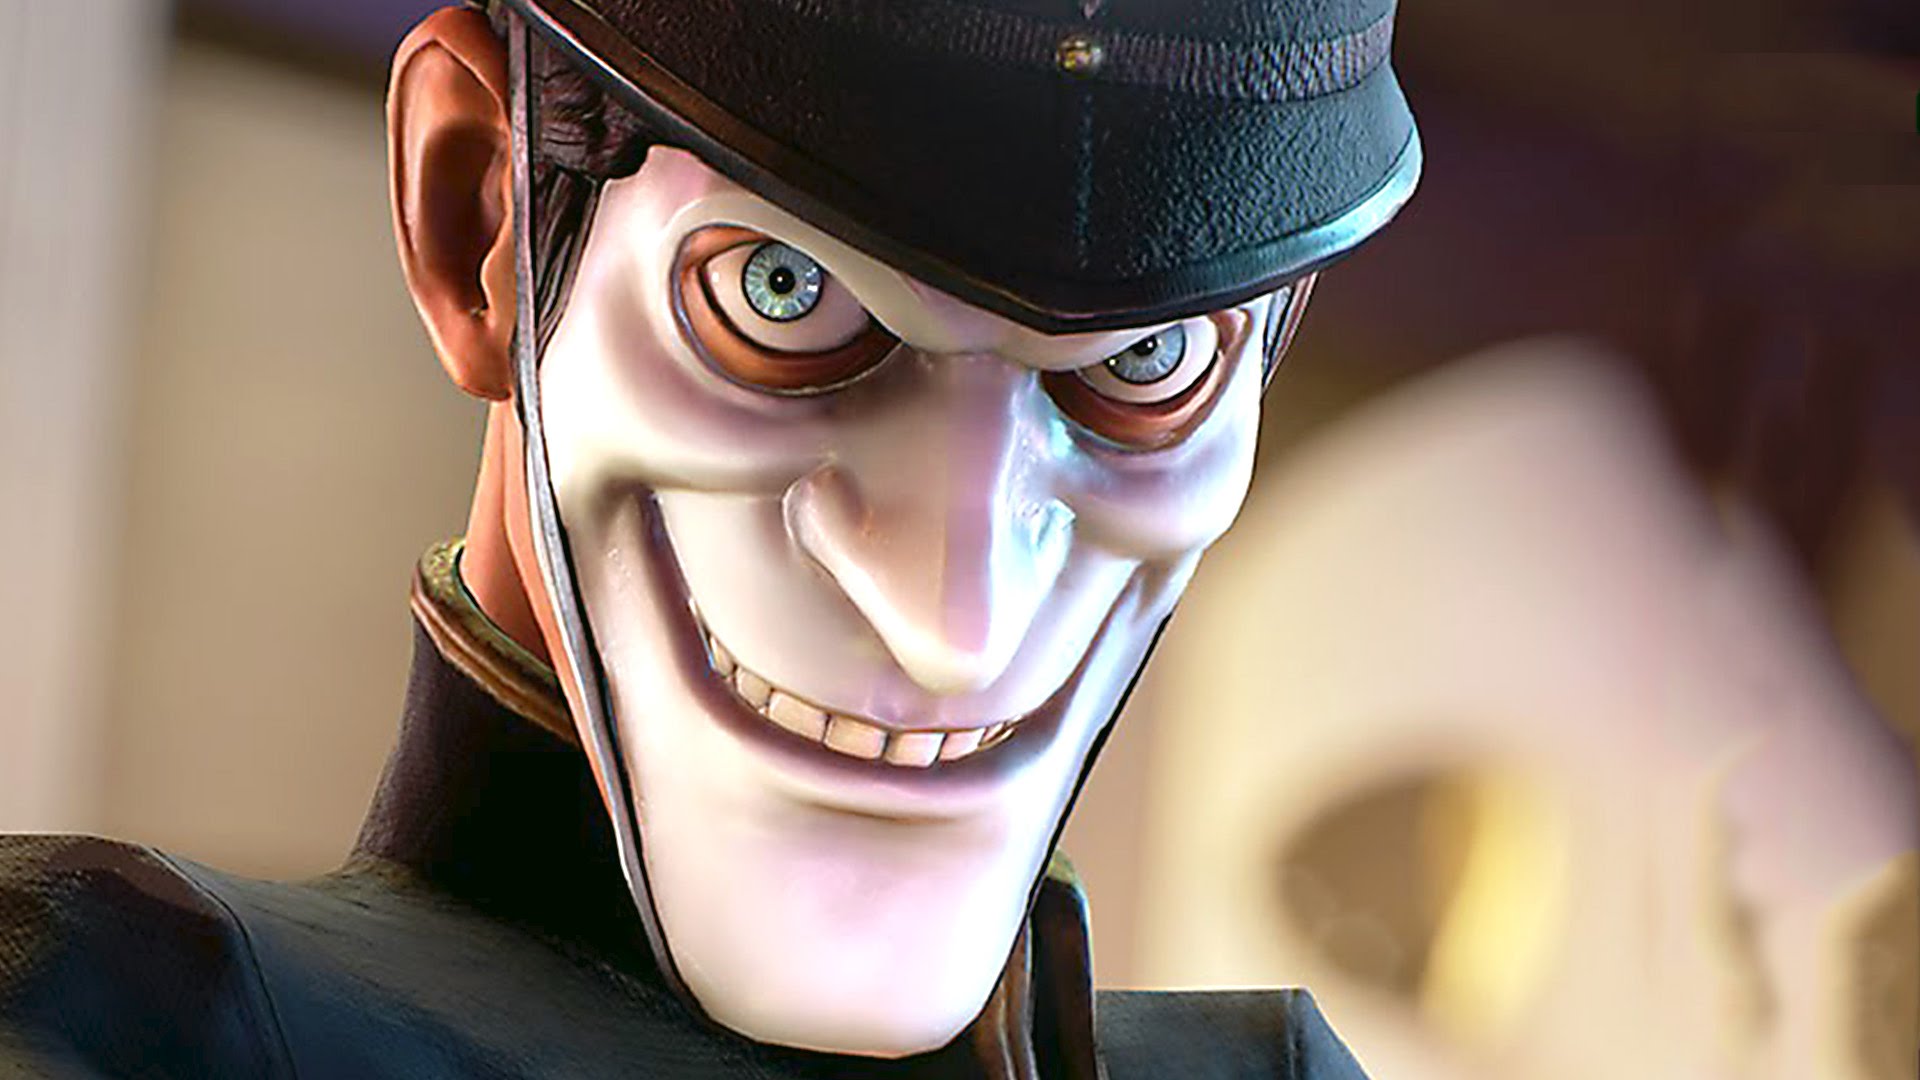 ‘We Happy Few’ Coming to Retailers Next Spring